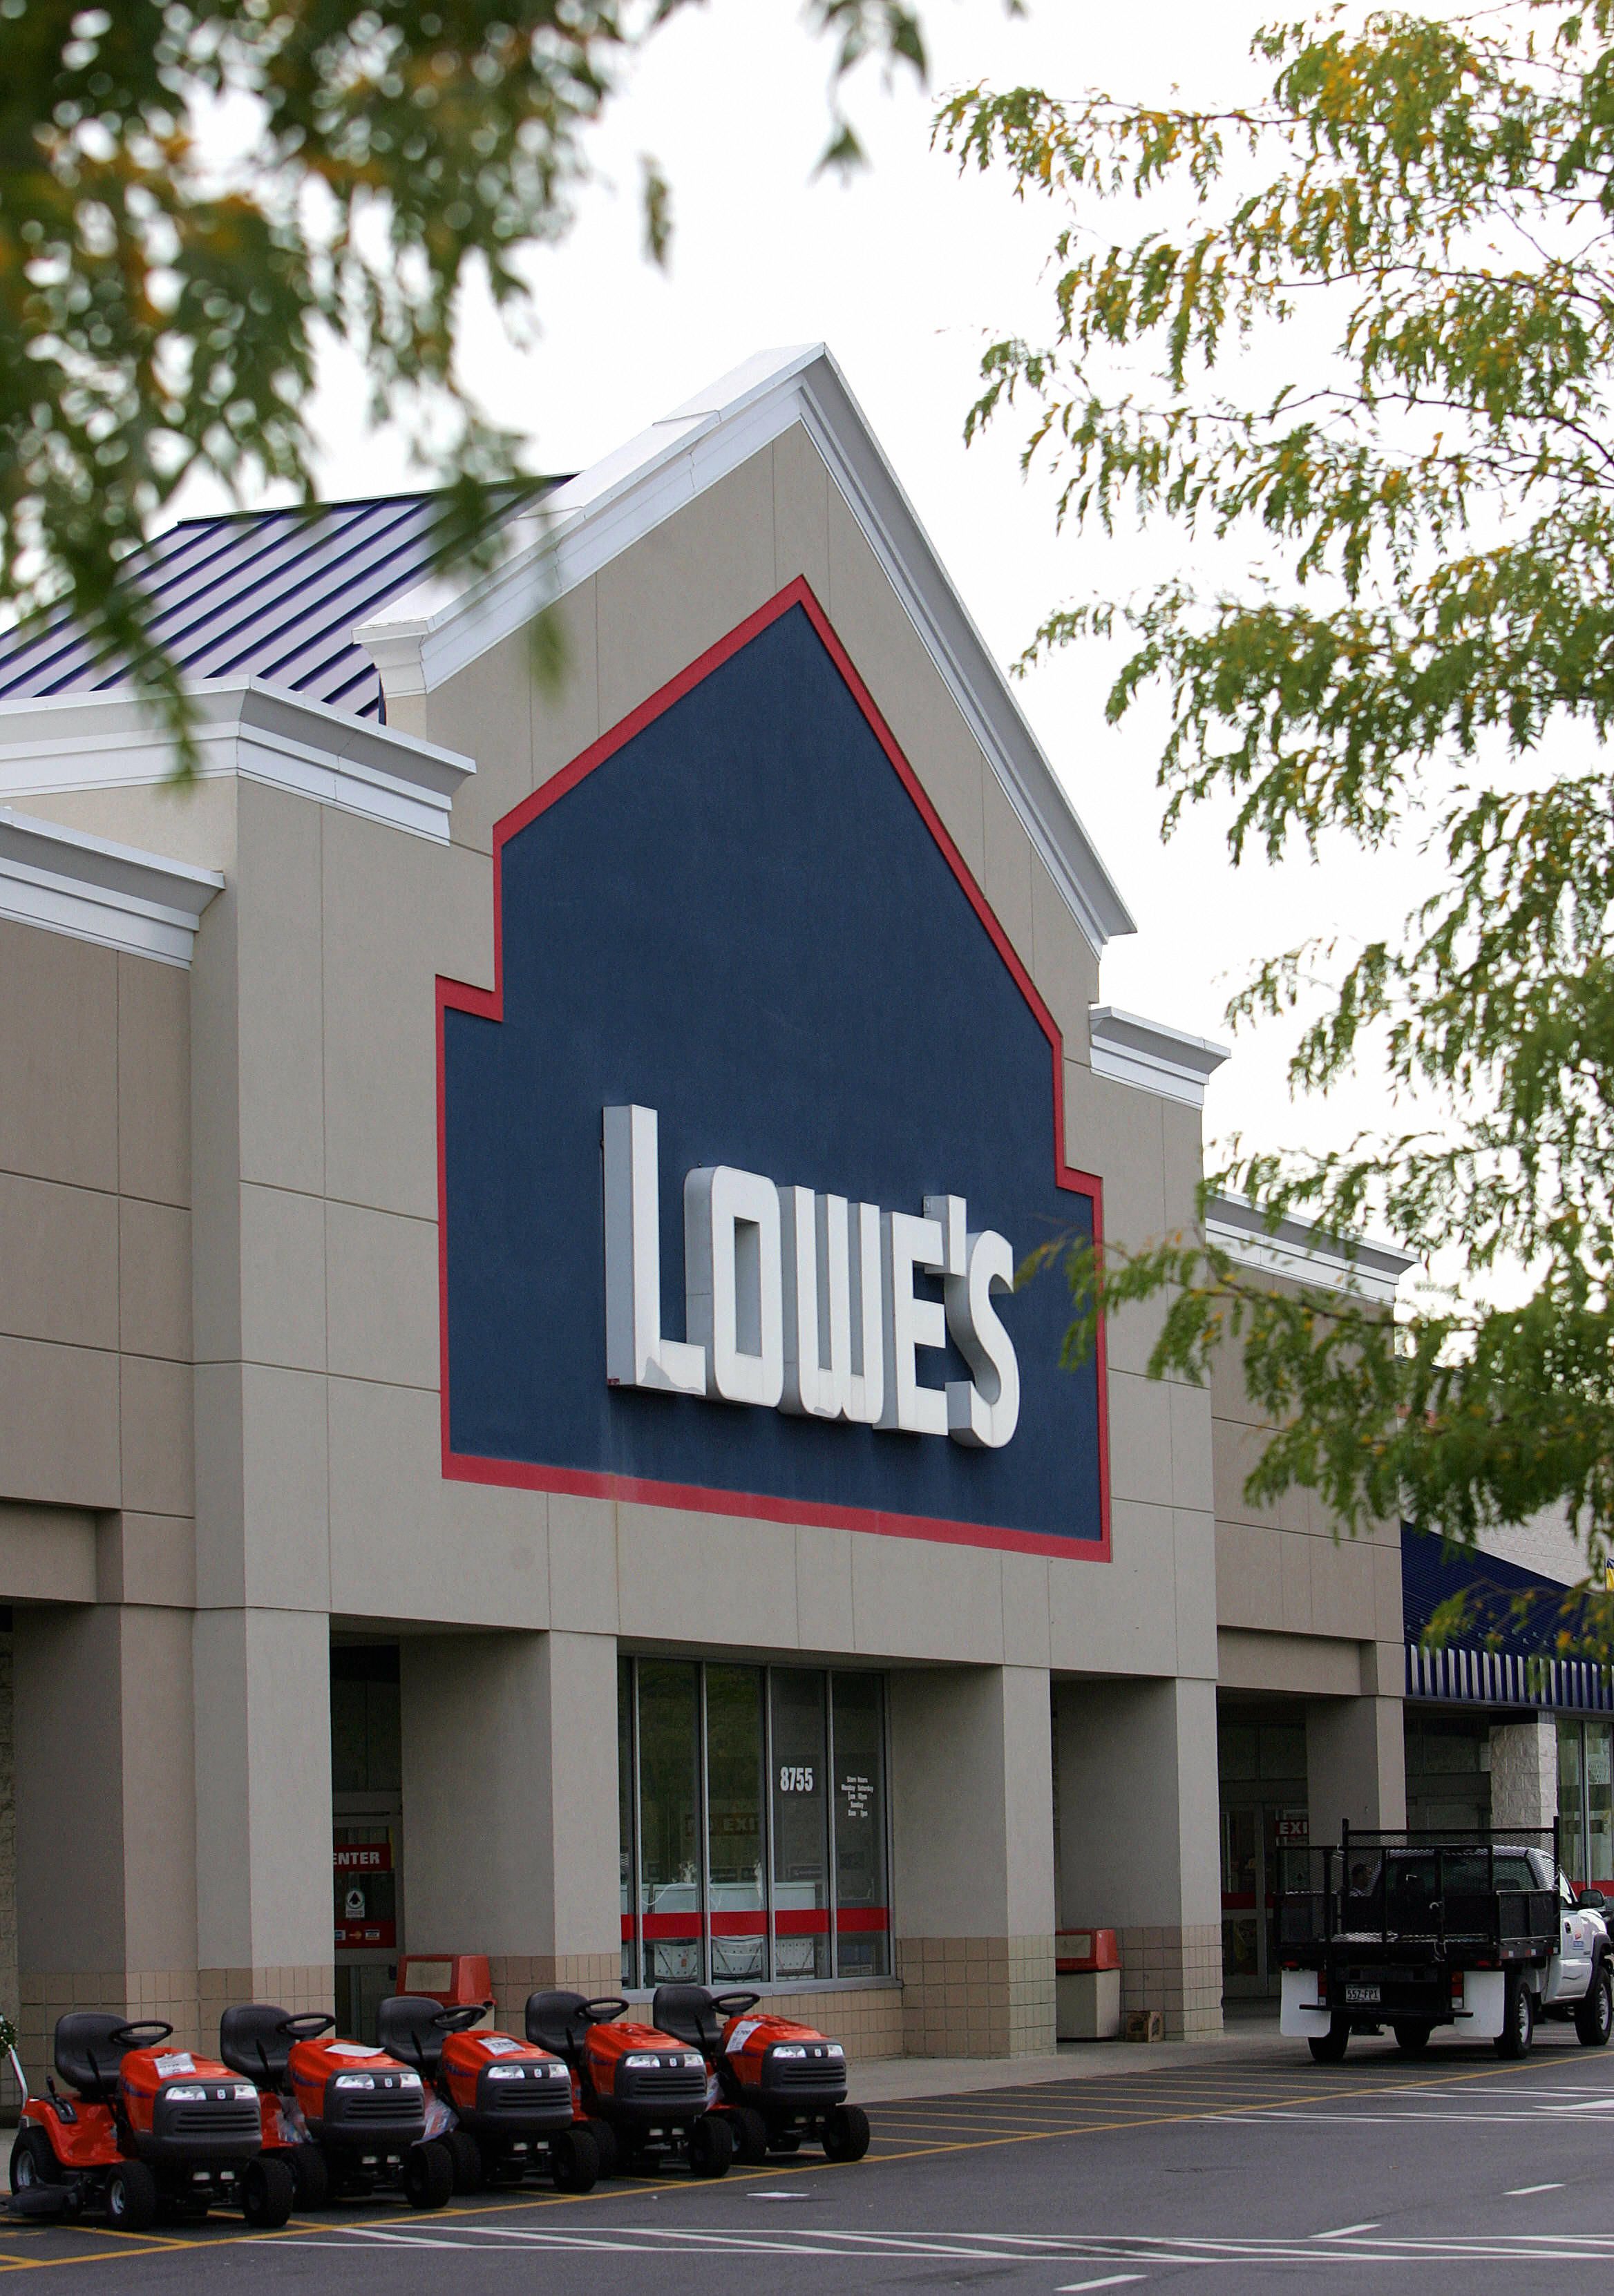 is lowes open on christmas day 2020 Is Lowe S Open On Thanksgiving Lowe S Holiday Hours 2020 is lowes open on christmas day 2020